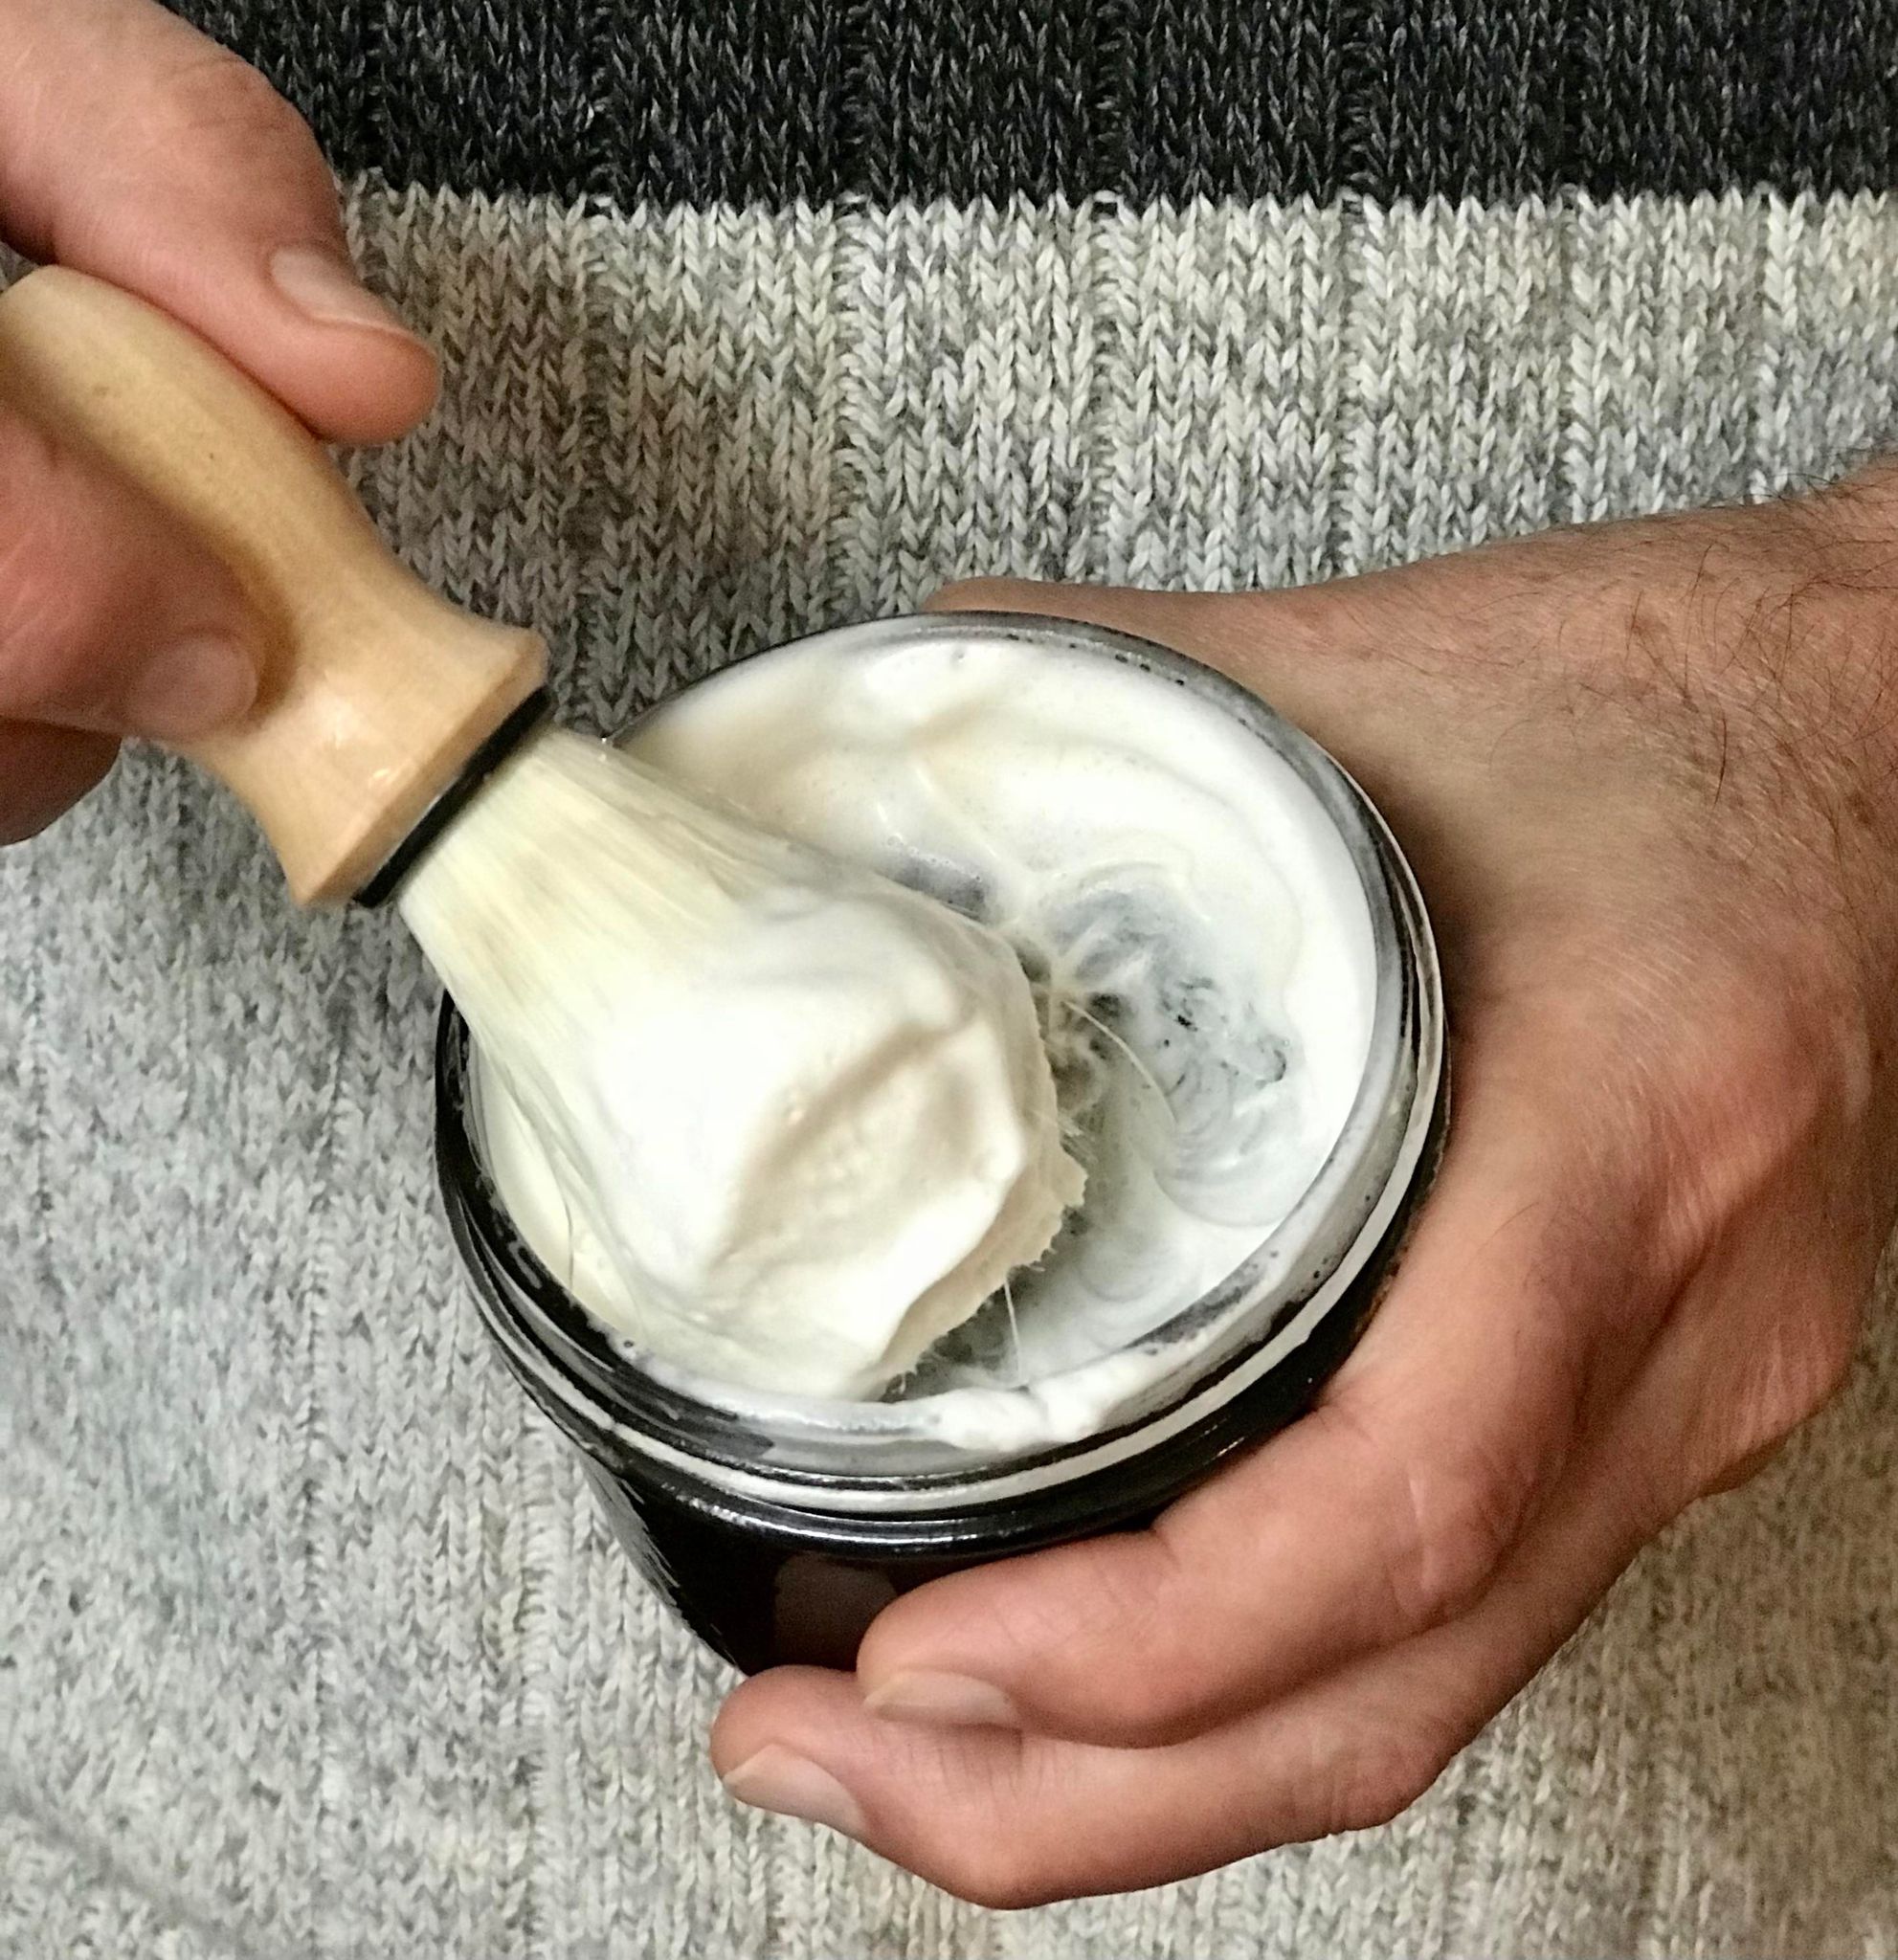 Beer shaving soap in a jar made in Canada by Simply Natural Canada comes in vanilla sandalwood, cedarwood citrus and citrus ginger (shaving brush sold separately)